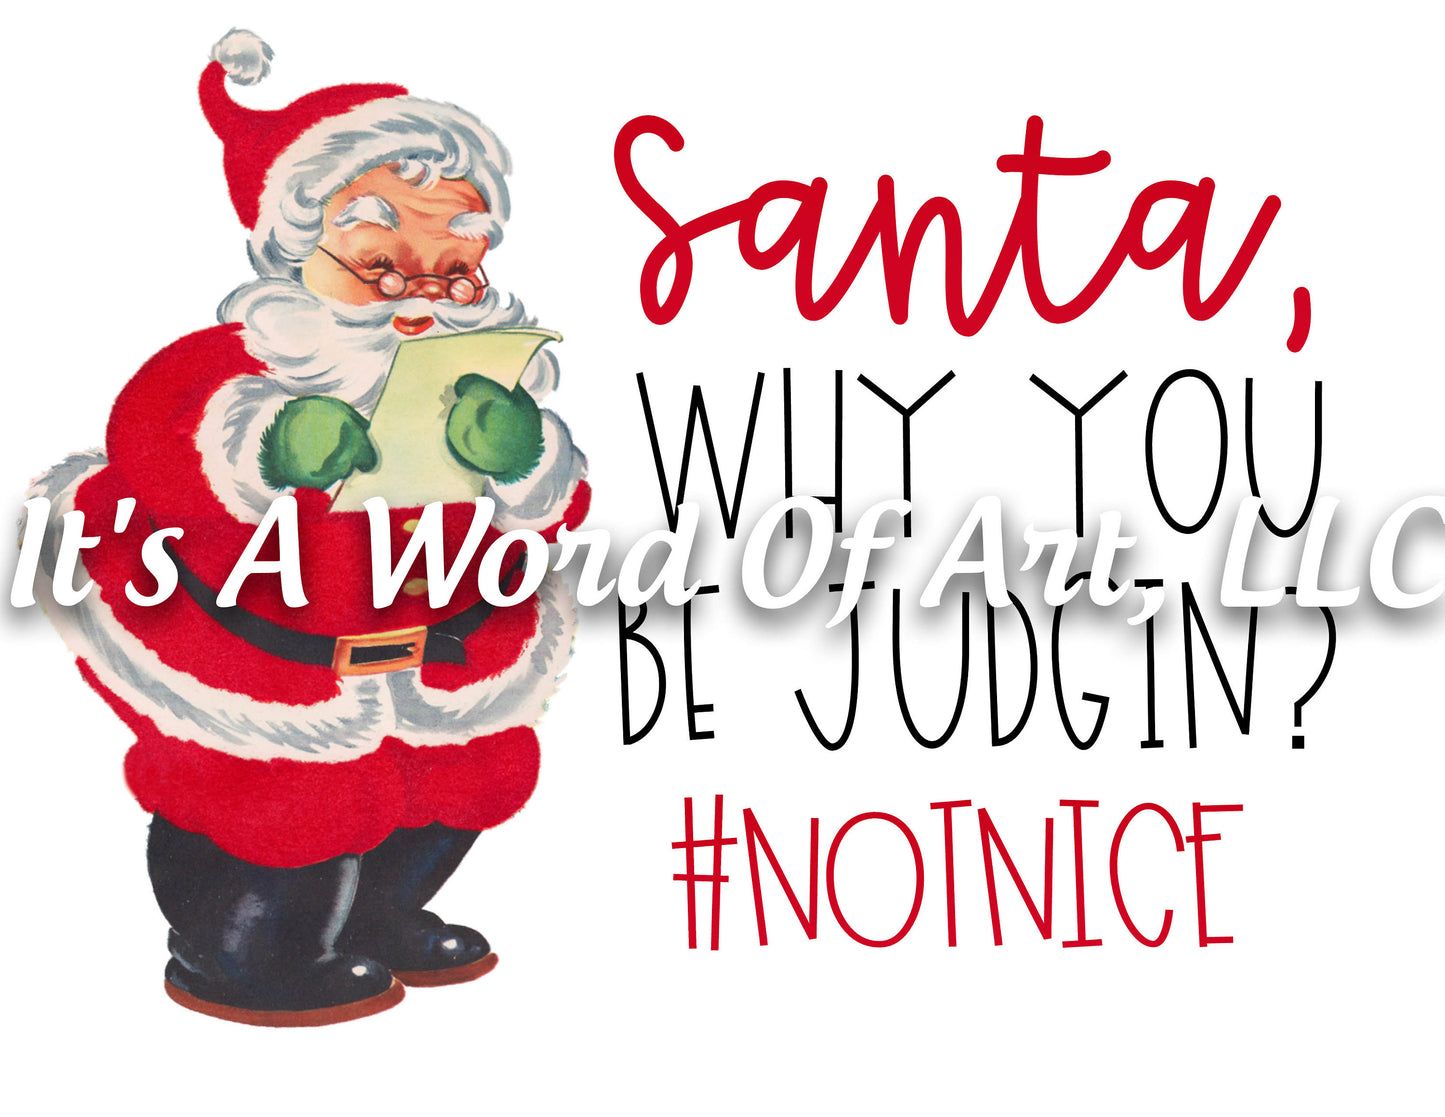 Christmas 150 - Santa Why You Be Judgin? Not Nice - Sublimation Transfer Set/Ready To Press Sublimation Transfer/Sublimation Transfer